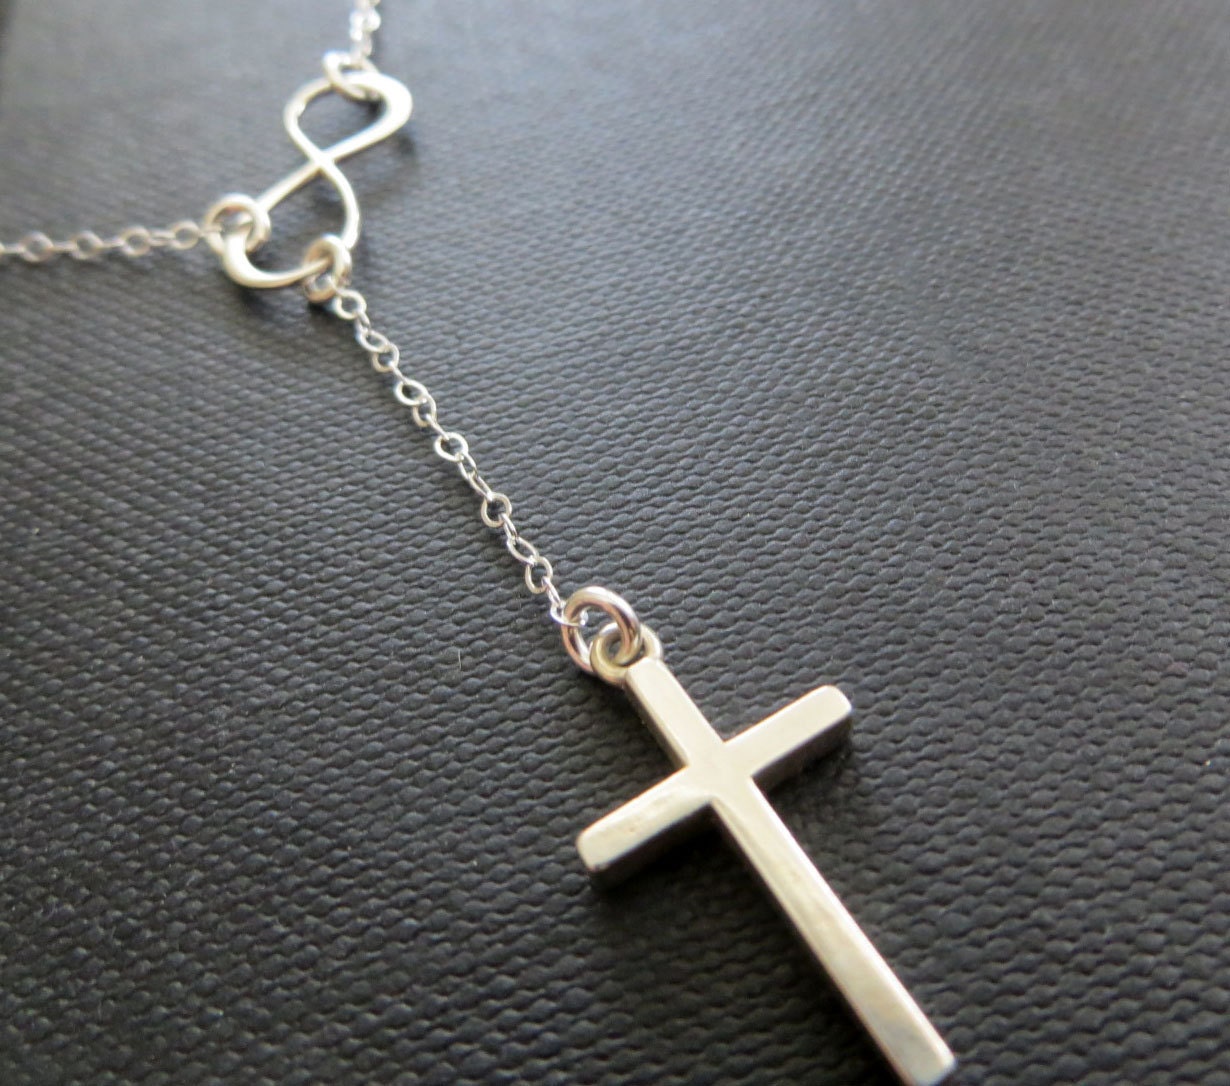 Cross necklace Infinity necklace Cross lariat necklace by NYmetals